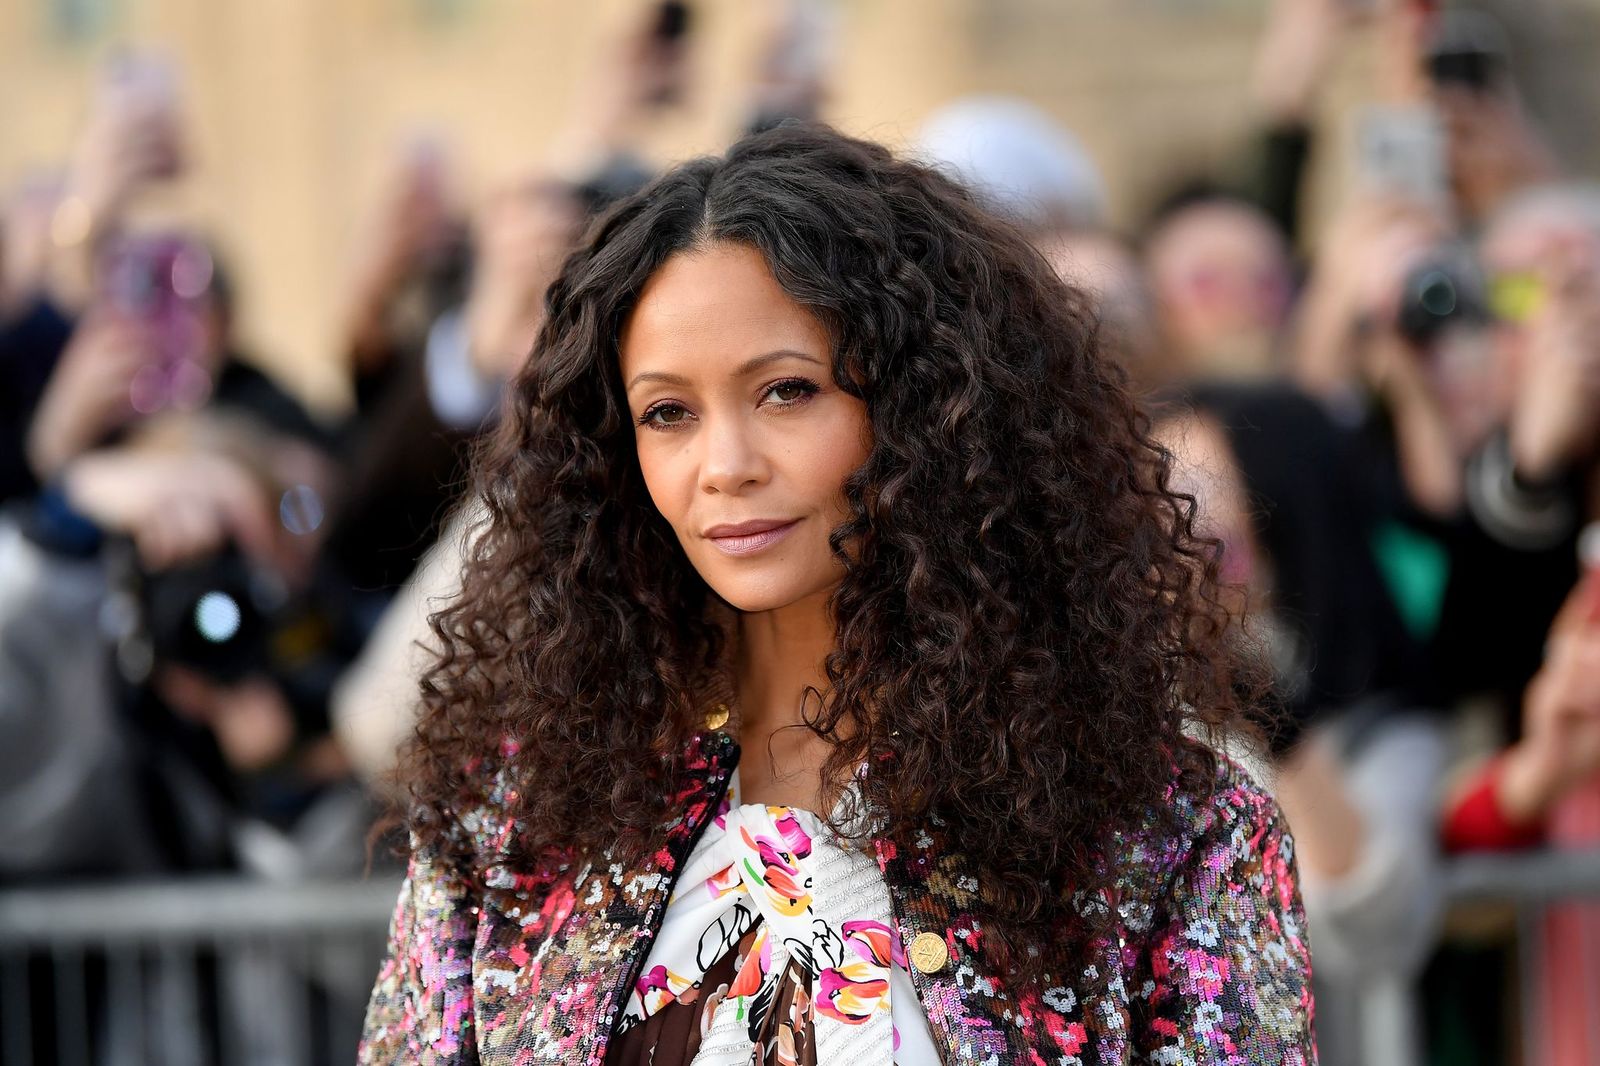 Thandie Newton at the Louis Vuitton show as part of Paris Fashion Week Womenswear Fall/Winter 2019/2020 on March 05, 2019 in Paris, France. | Photo: Getty Images